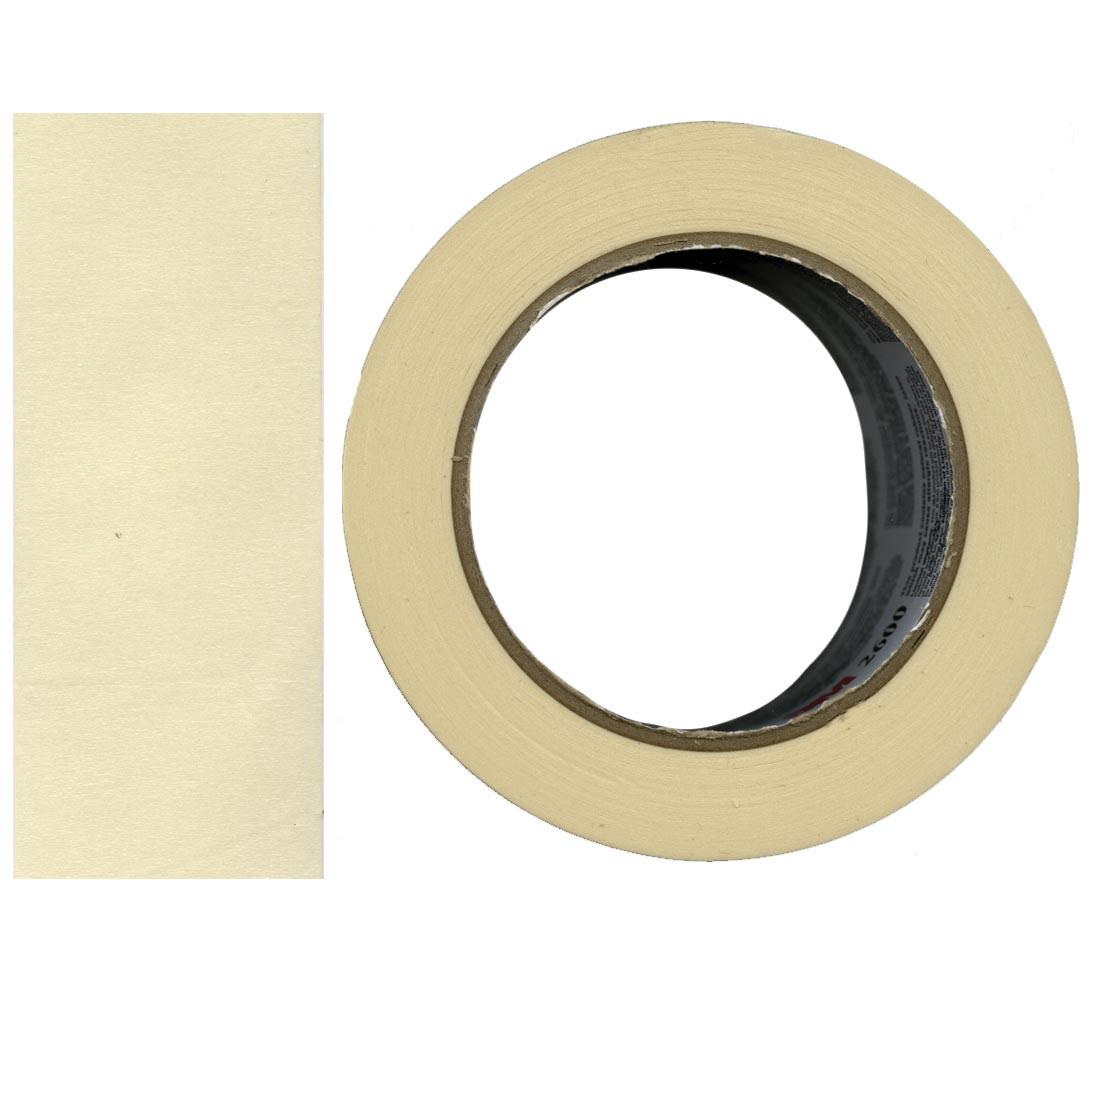 3M #2600 Wide Masking Tape, 2" Wide